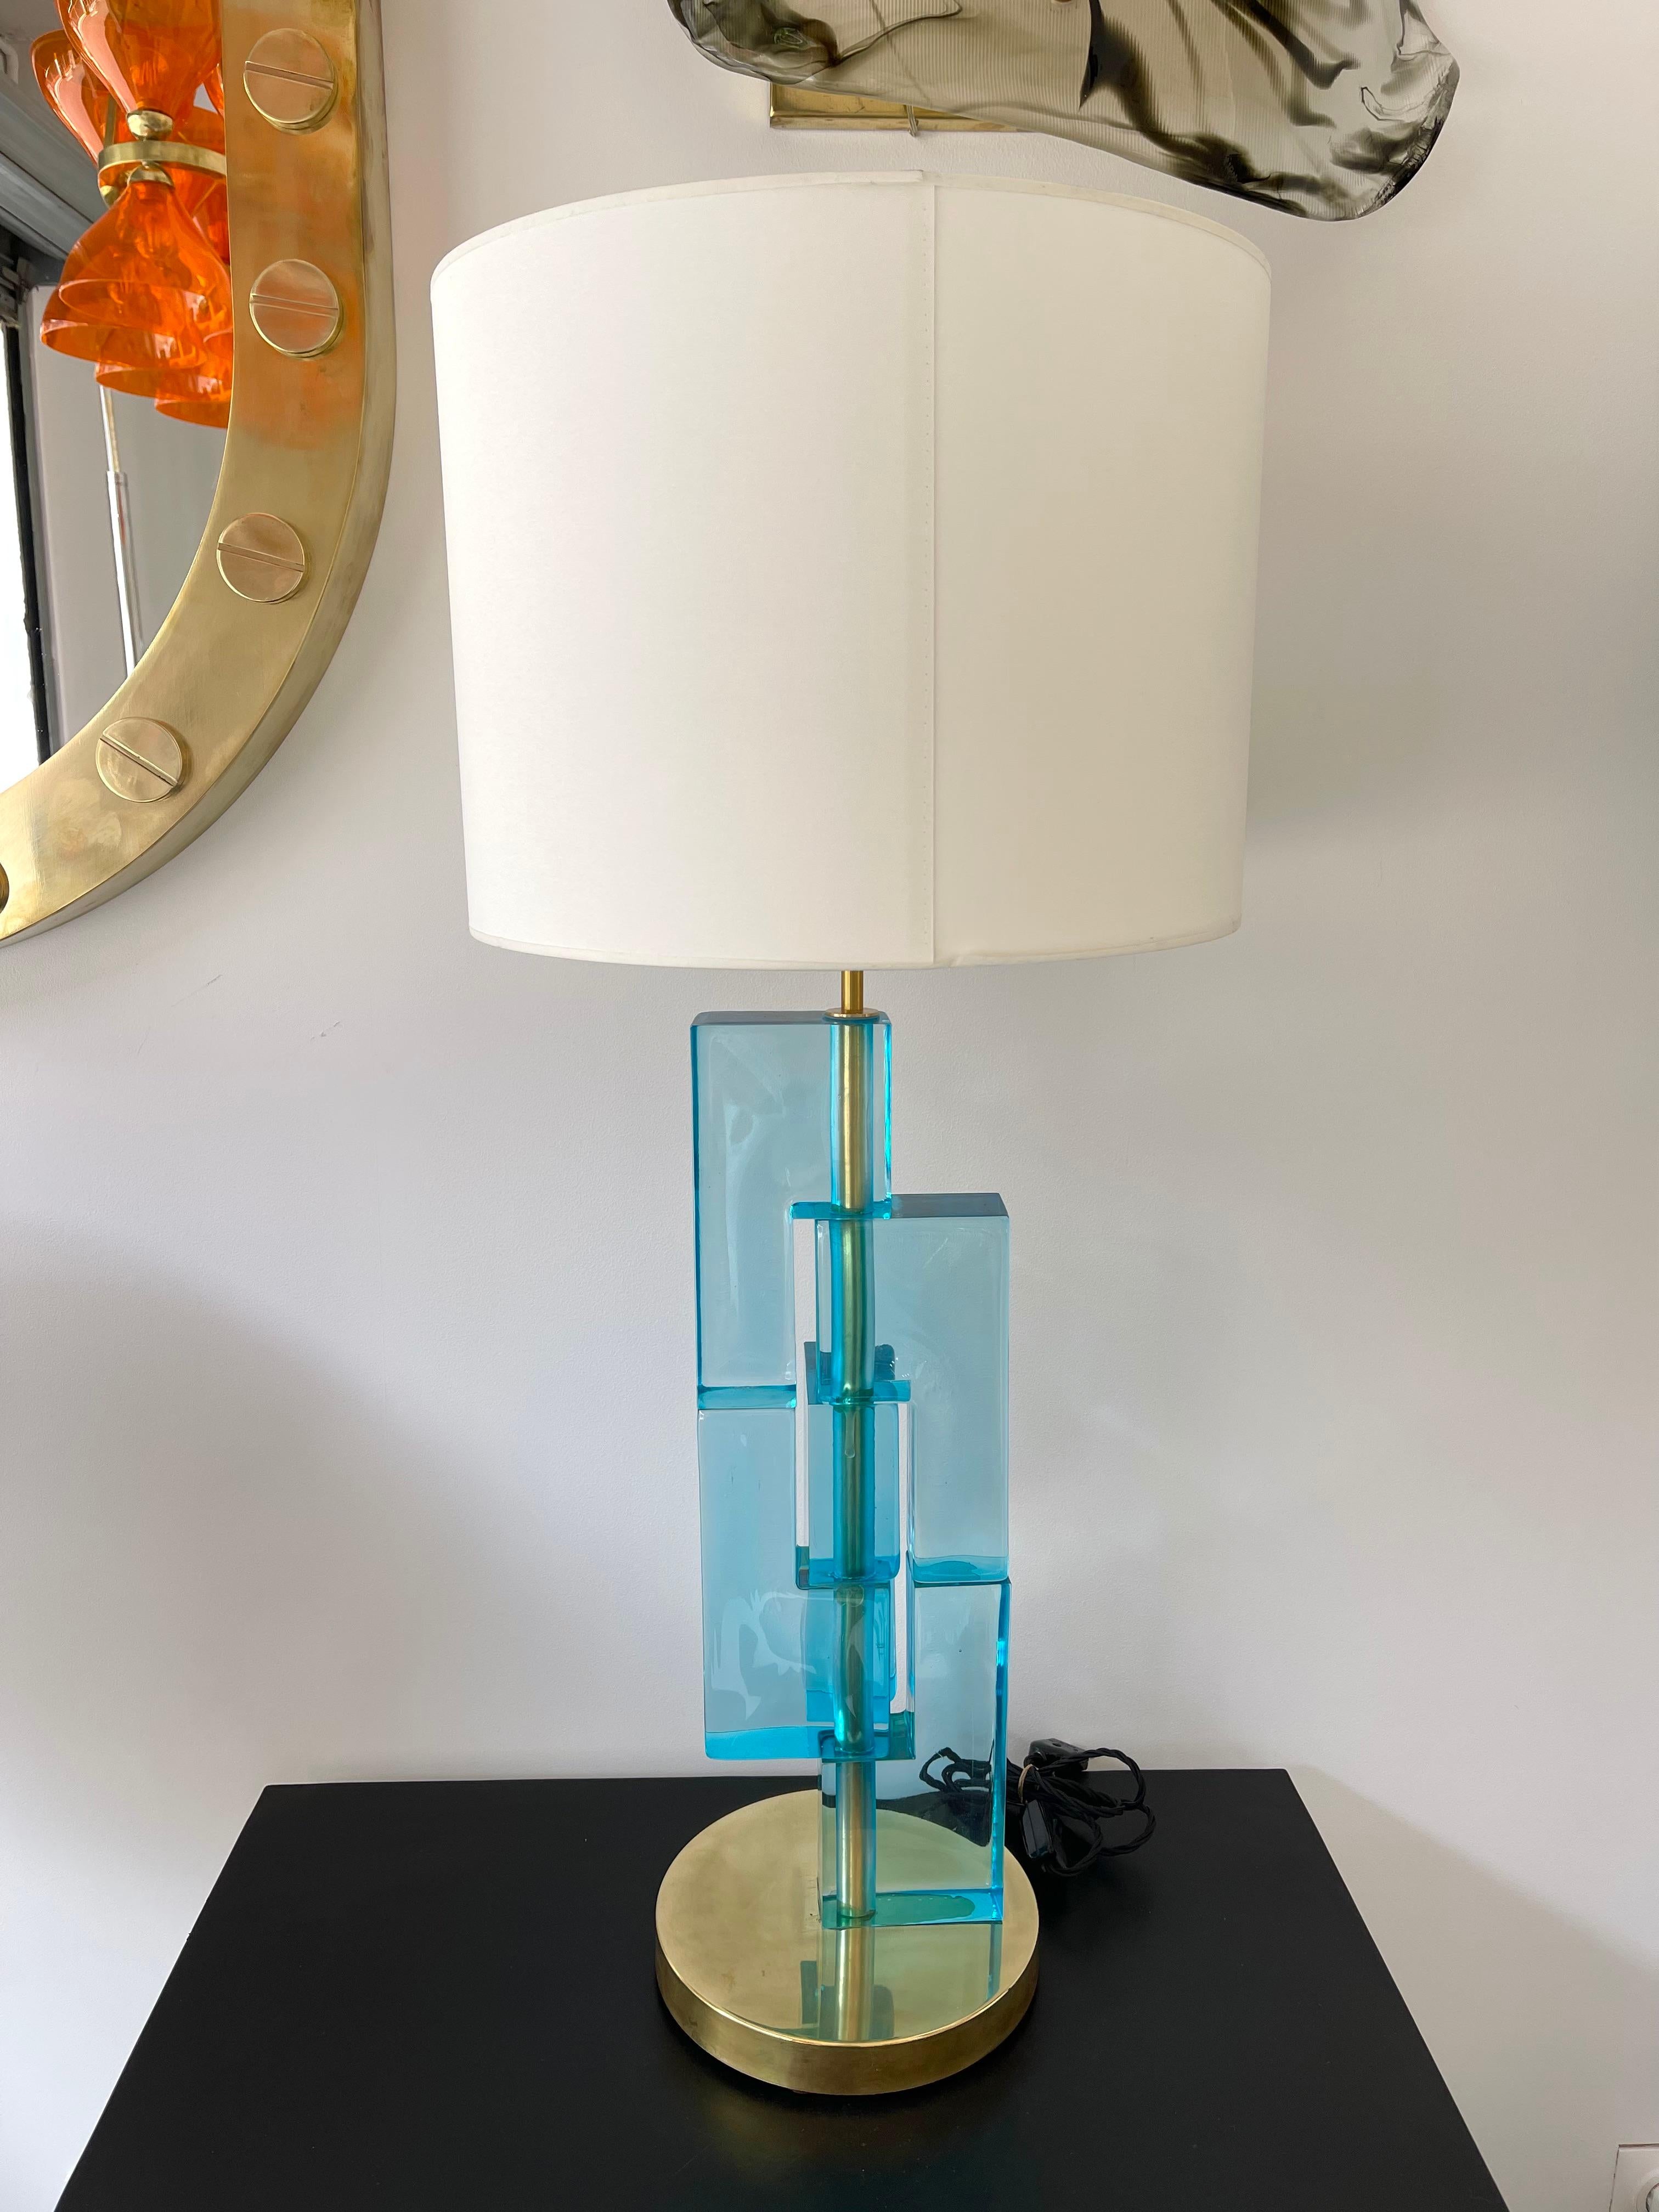 Huge pair of contemporary table or bedside lamps cubic pressed blue lagoon Murano glass block and brass base. Few exclusive production. In the style of Mazzega, Veronese, Poliarte, Venini, Vistosi, Carlo Aldo Nason, Toni Zuccheri for